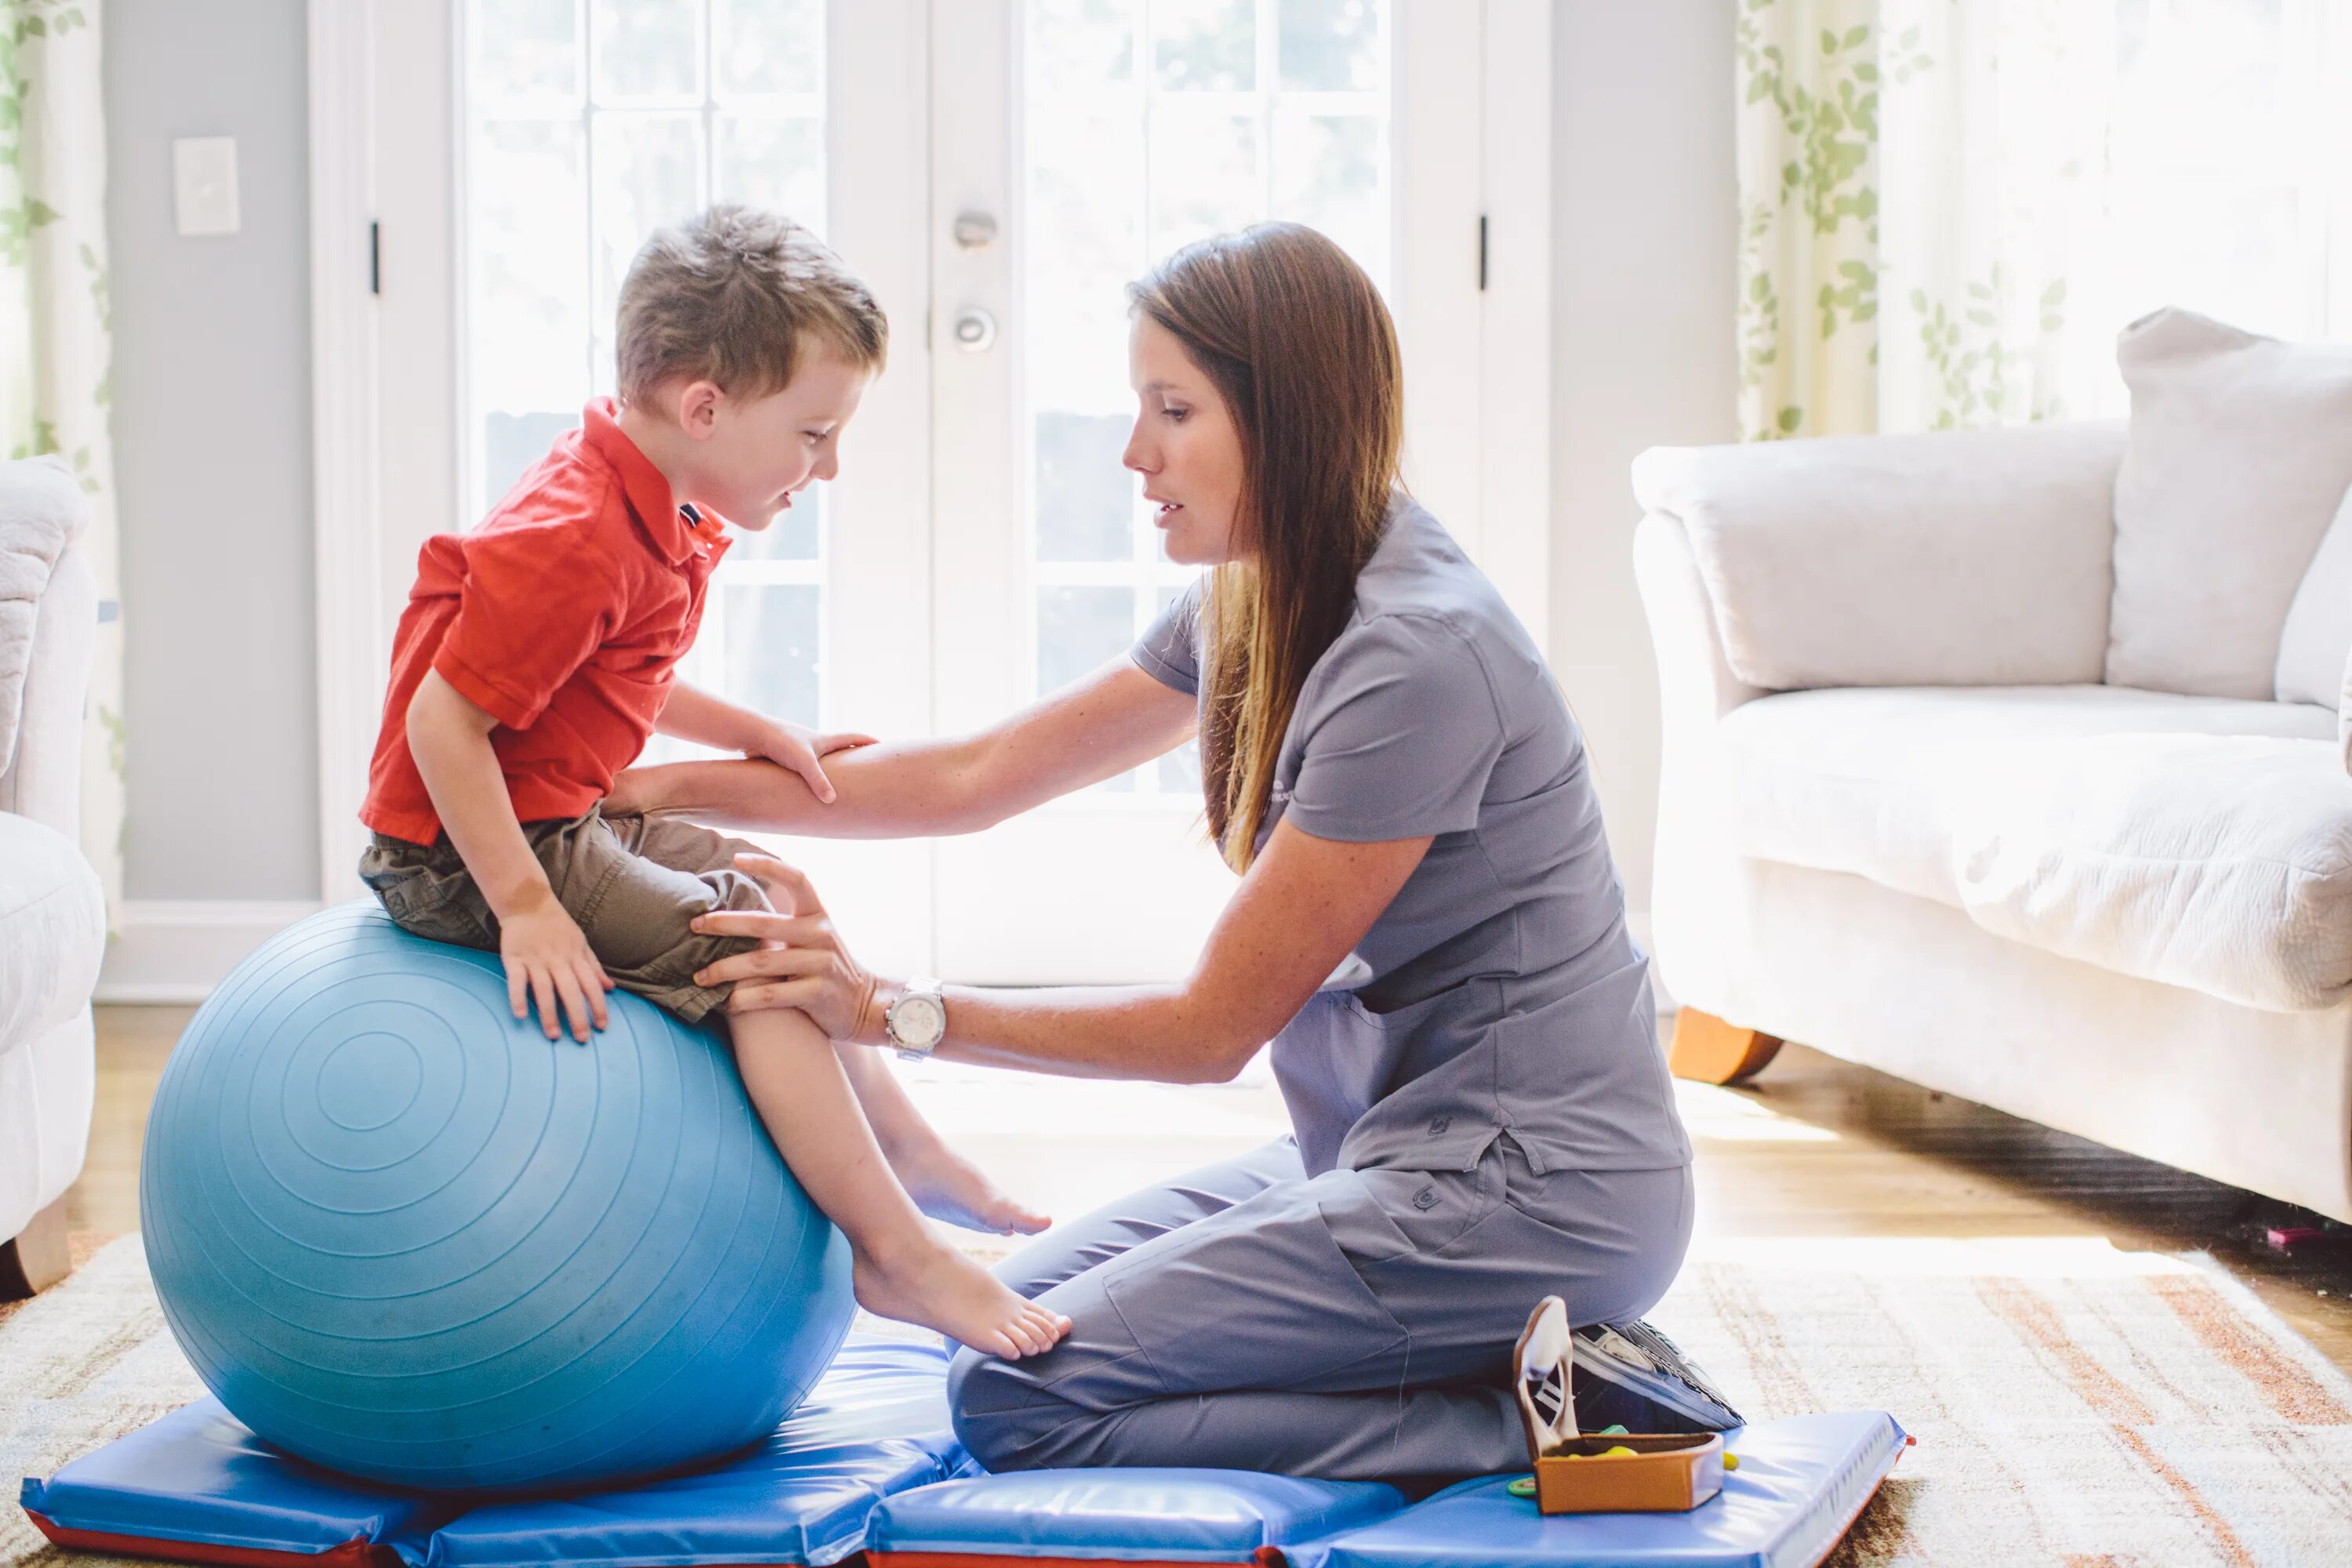 Pediatric physical Therapy. Физиотерапия для детей. Physical Therapy Kids. Pediatric Occupational Therapy.